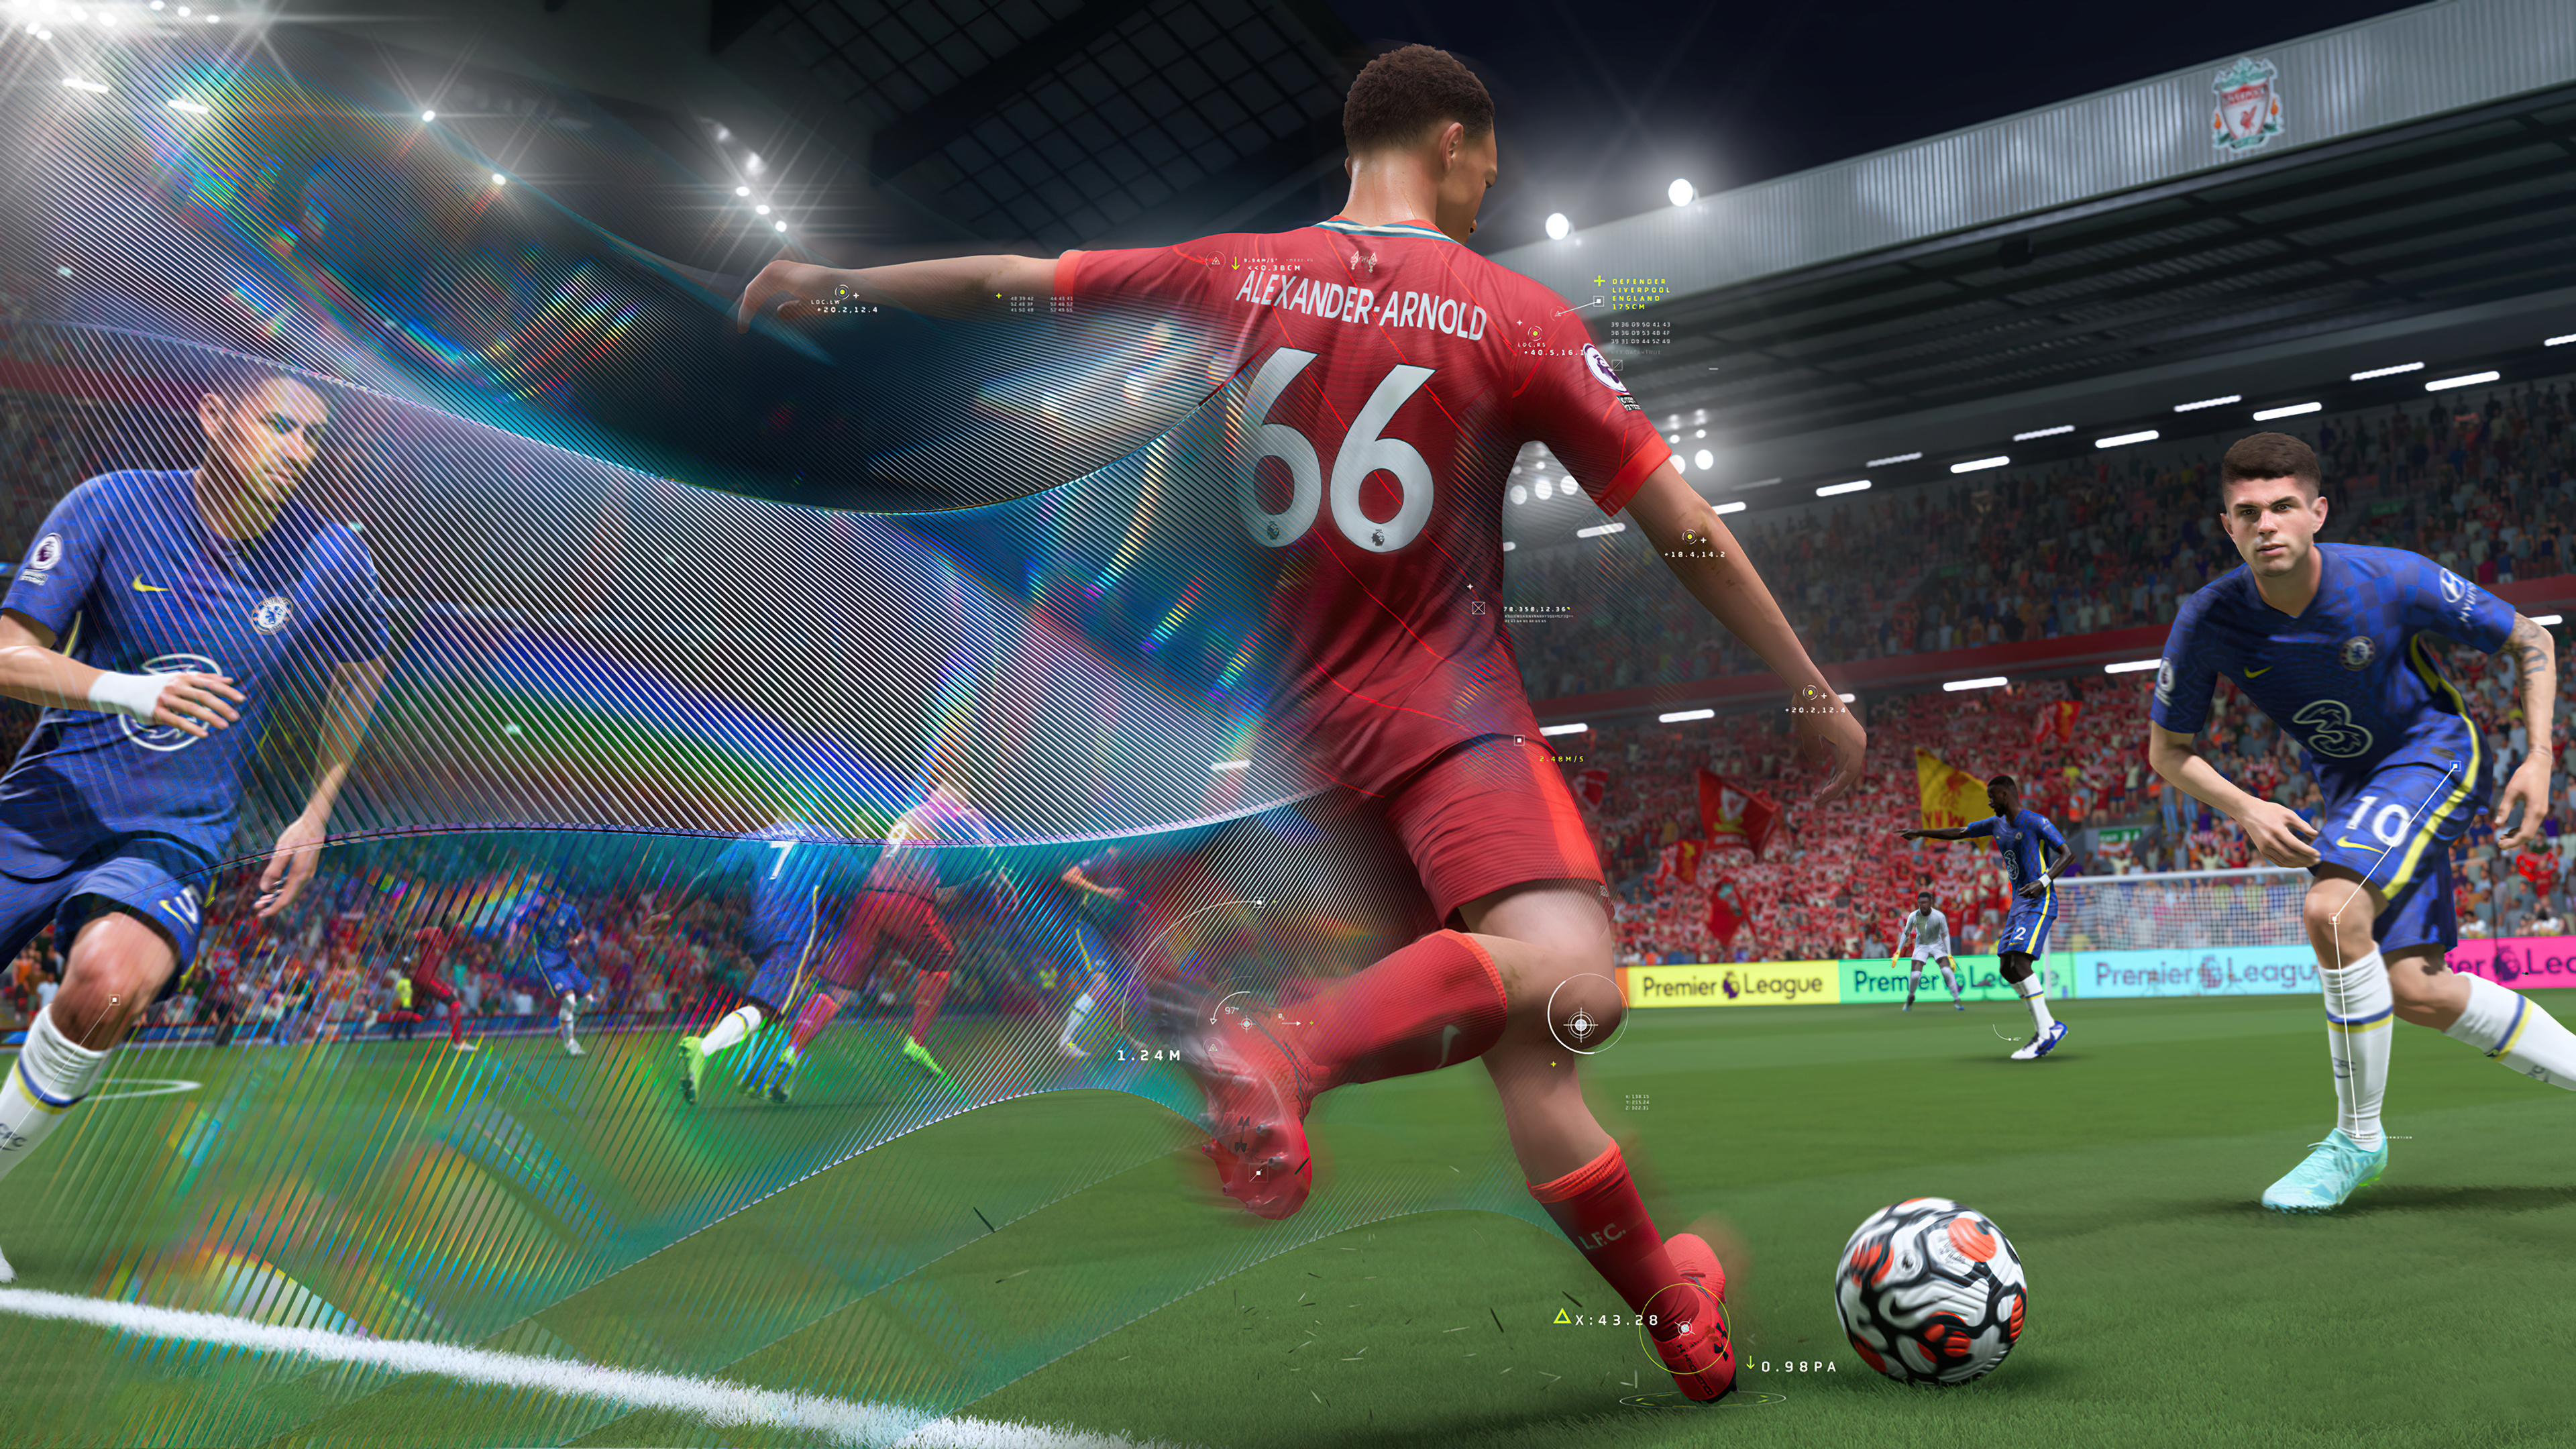 FIFA Soccer (Game): A football simulator published by Electronic Arts, The 29th installment, 2022. 3840x2160 4K Wallpaper.